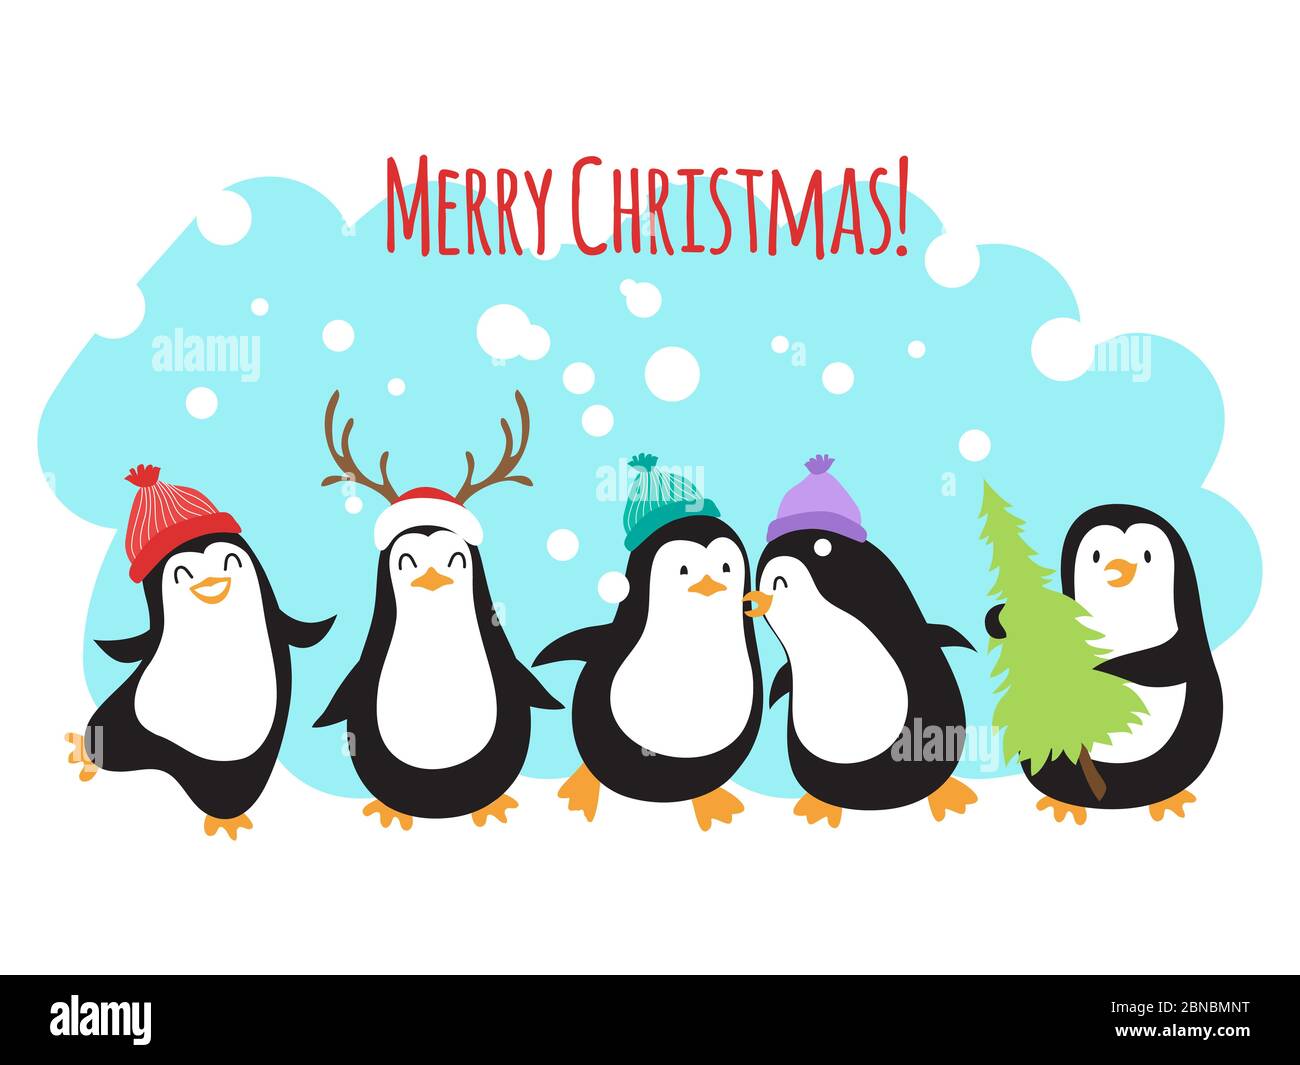 Christmas winter holidays vector greeting banner or background with cute cartoon penguins. Penguin merry xmas celebration, snowy banner illustration Stock Vector